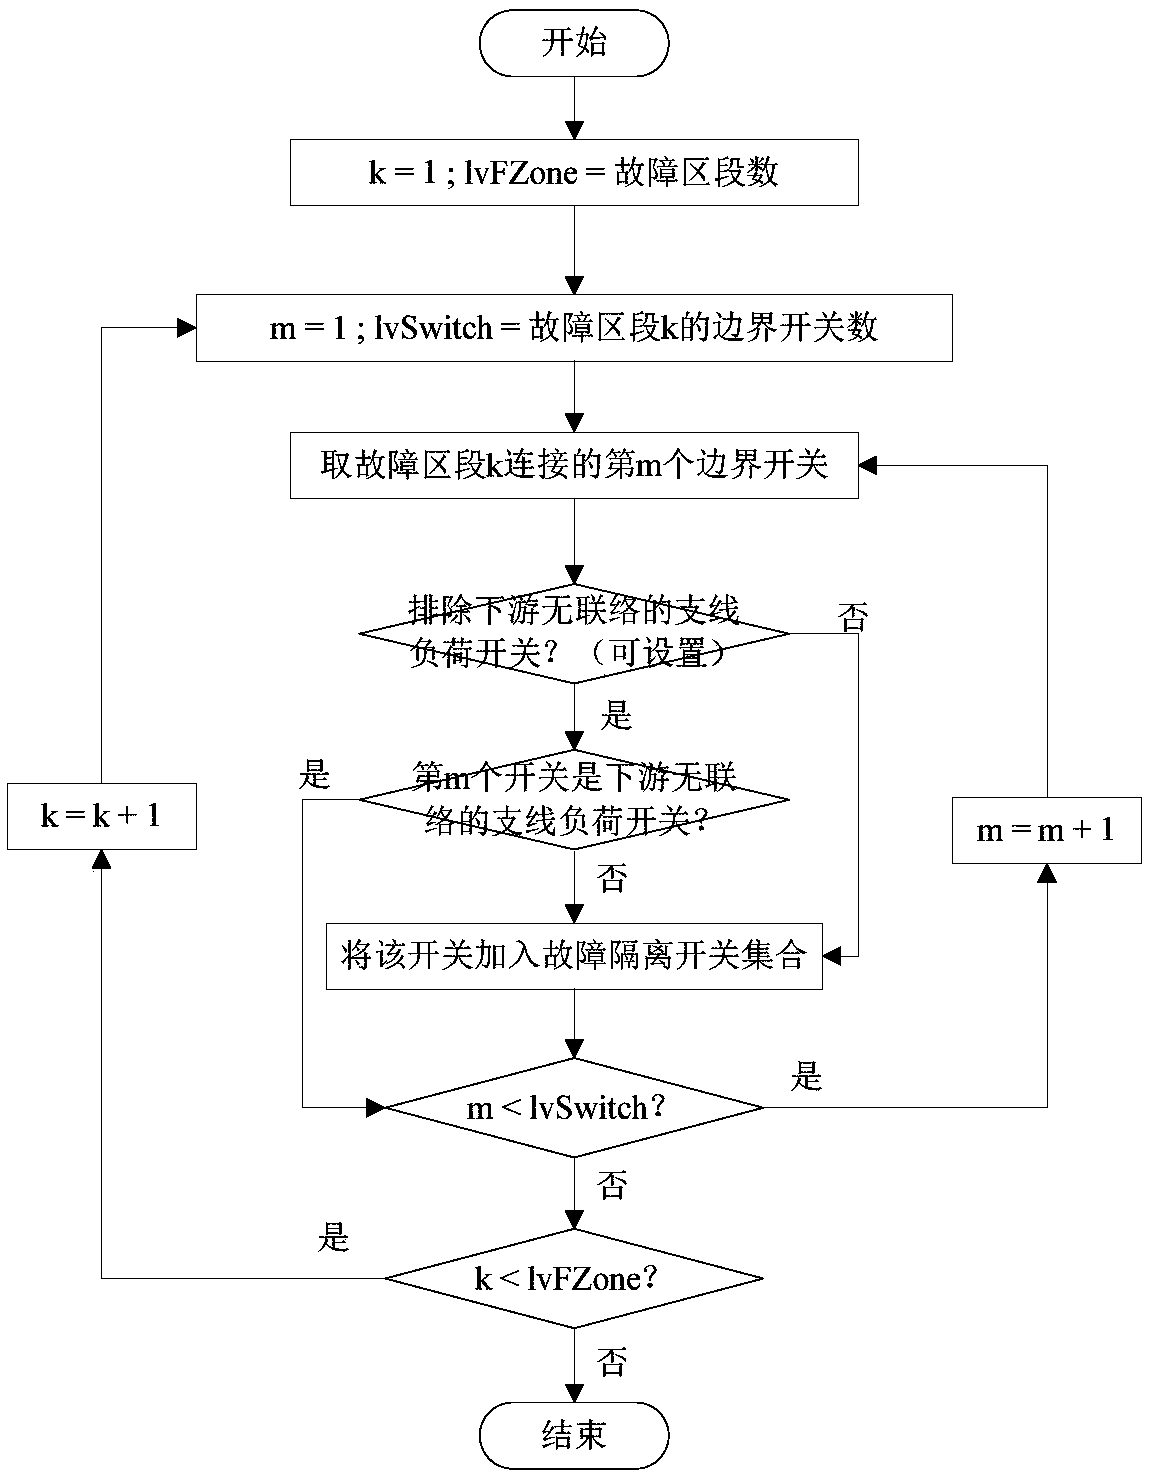 Power distribution network self-healing control method combining master station and local control